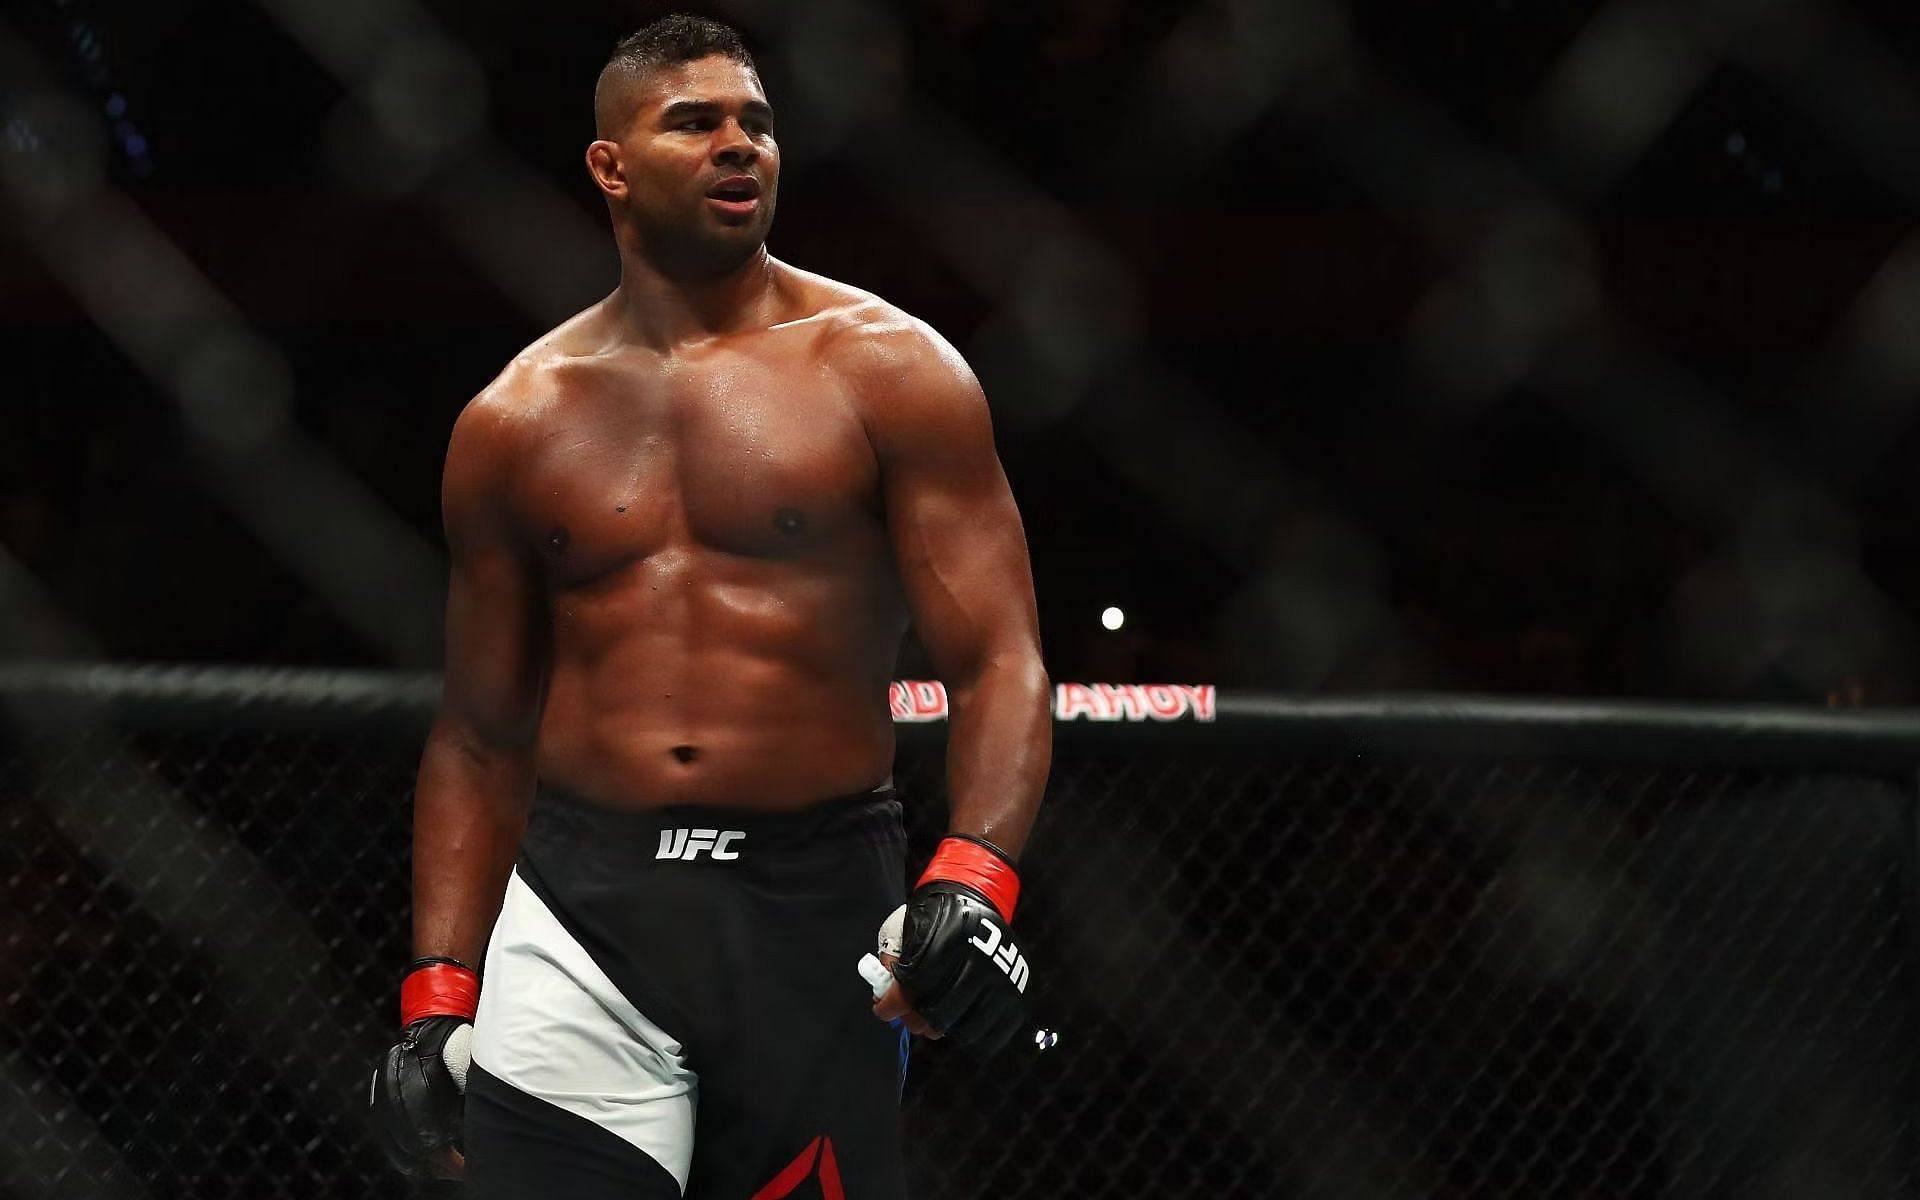 Alistair Overeem during his UFC heyday [Image Credit: Getty]